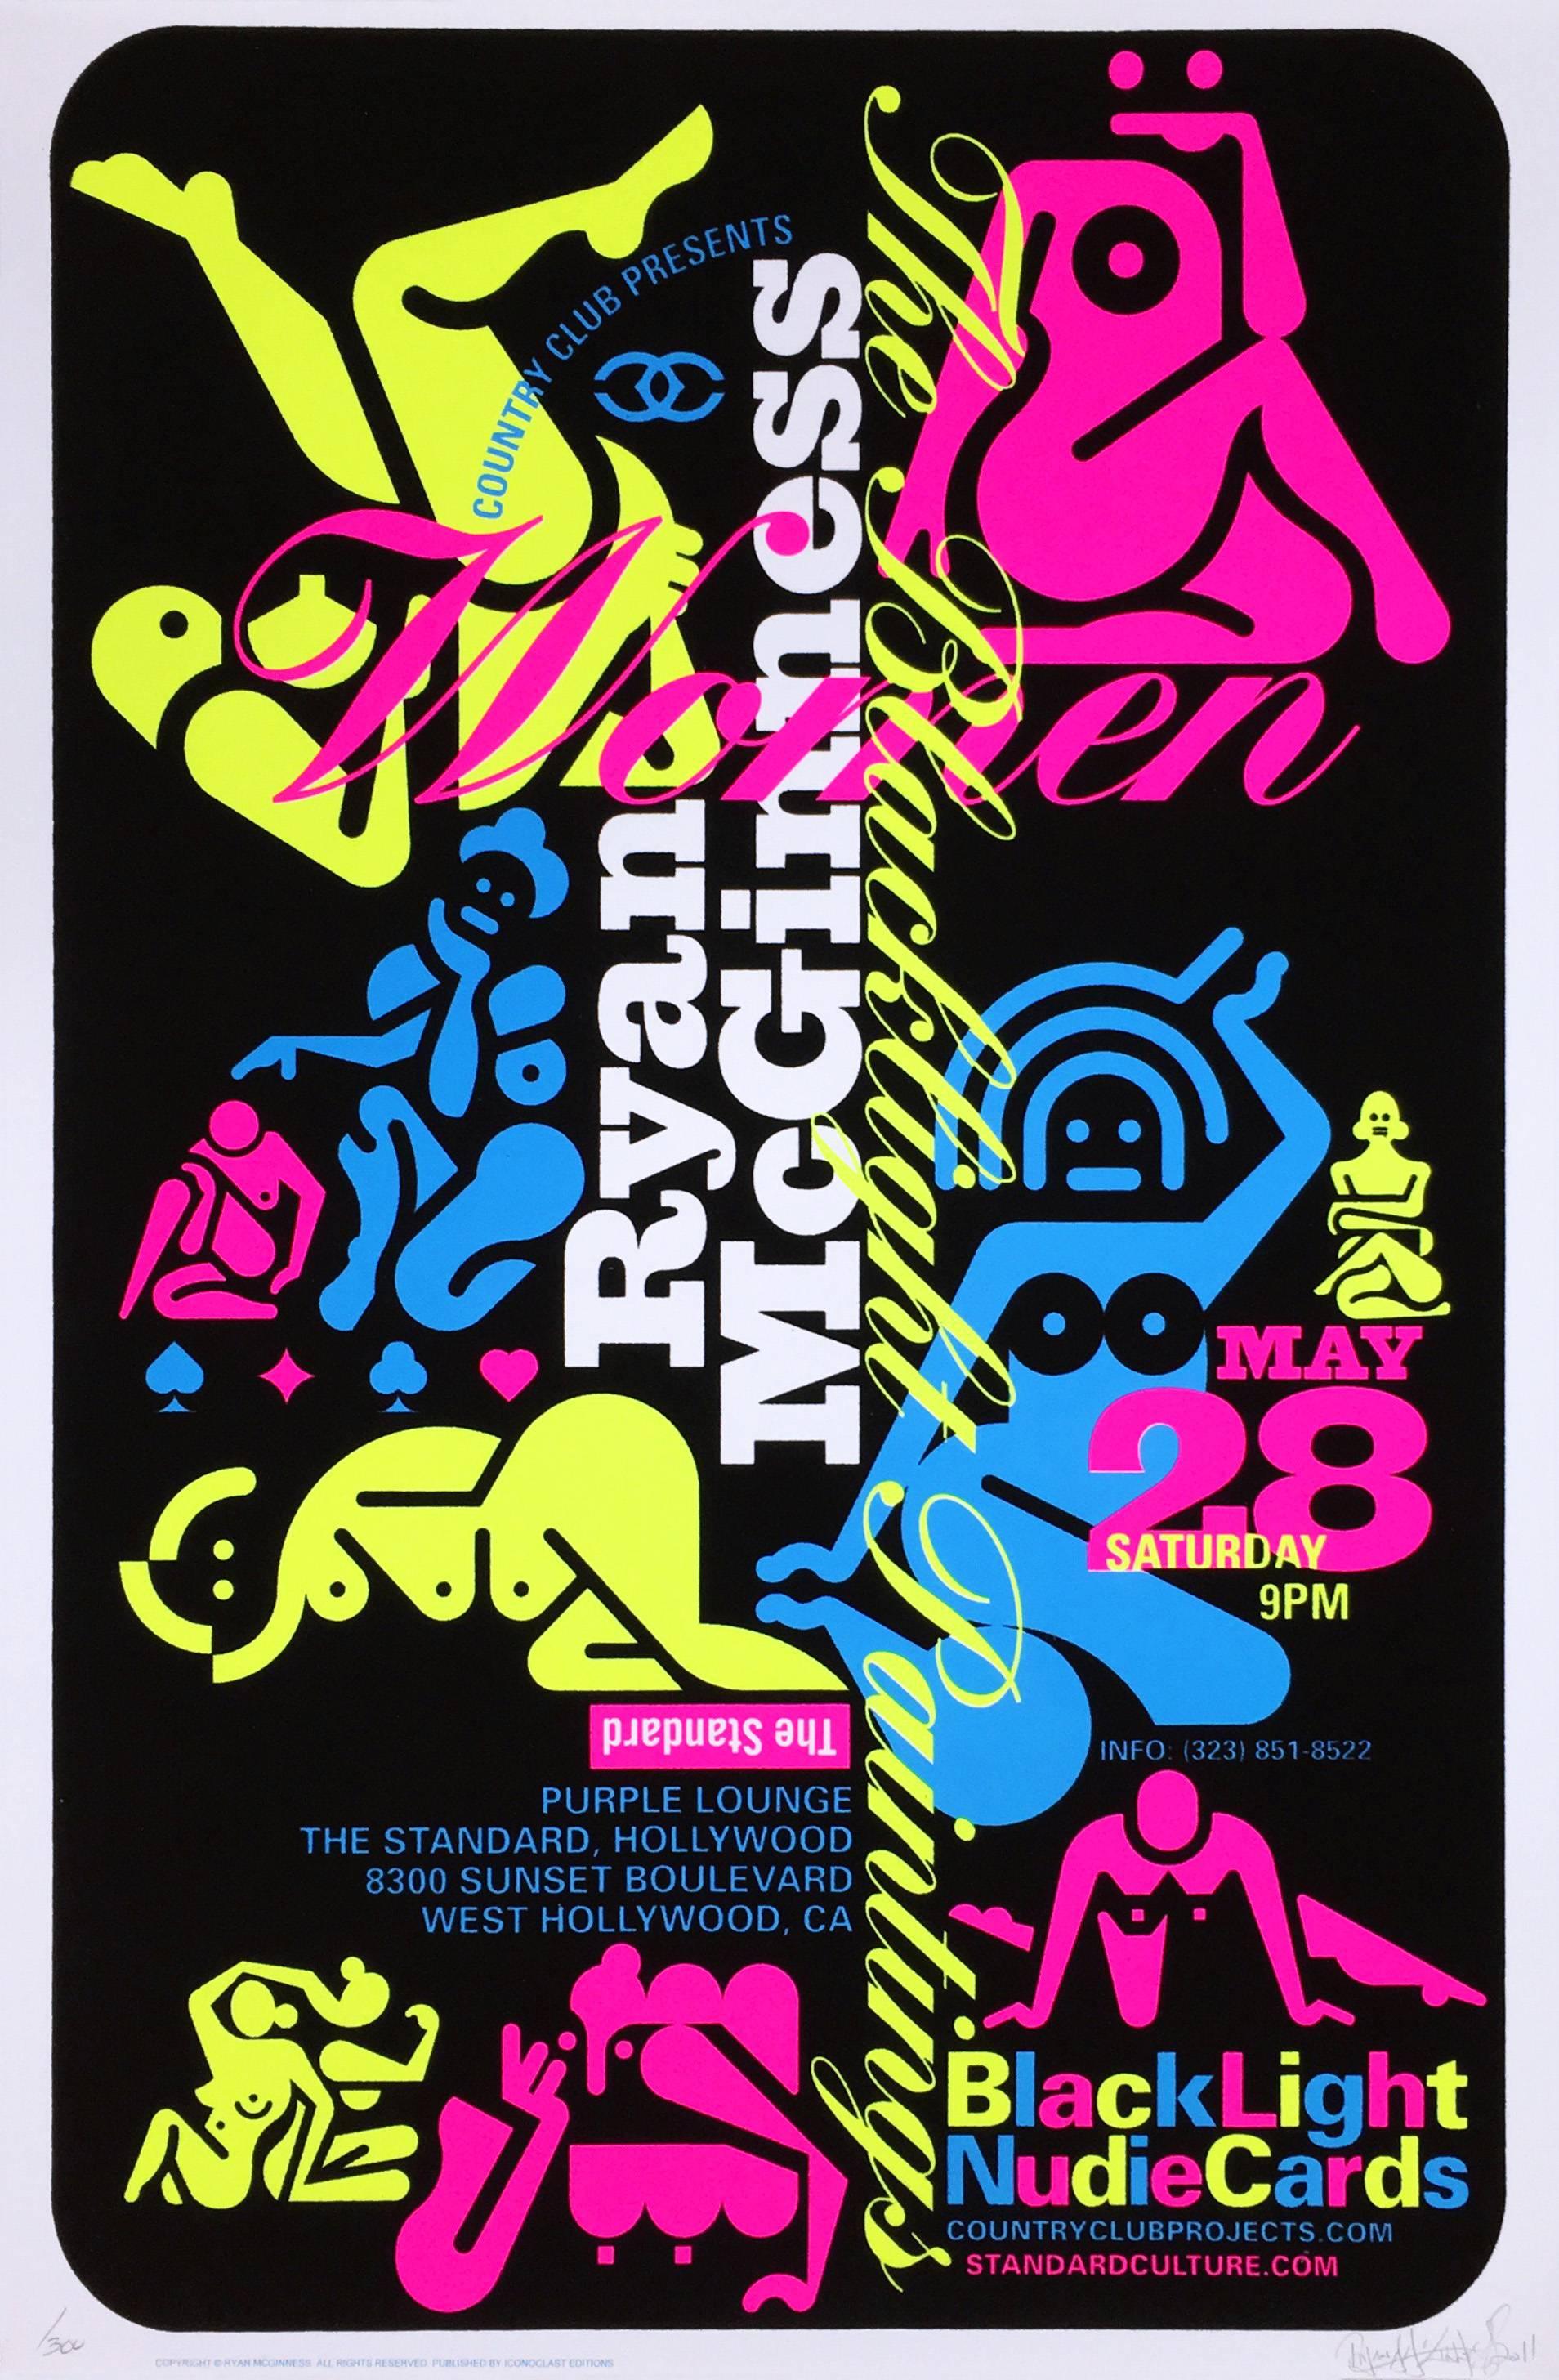 Ryan McGinness
Women: The Blacklight Paintings
Exhibit Poster: The Standard Hotel, Los Angeles, 2010

Screen-print with black flocking and fluorescent ink on paper
23 x 35 inches (58 x 89 cm)
Hand-signed from a limited edition of 300 (in